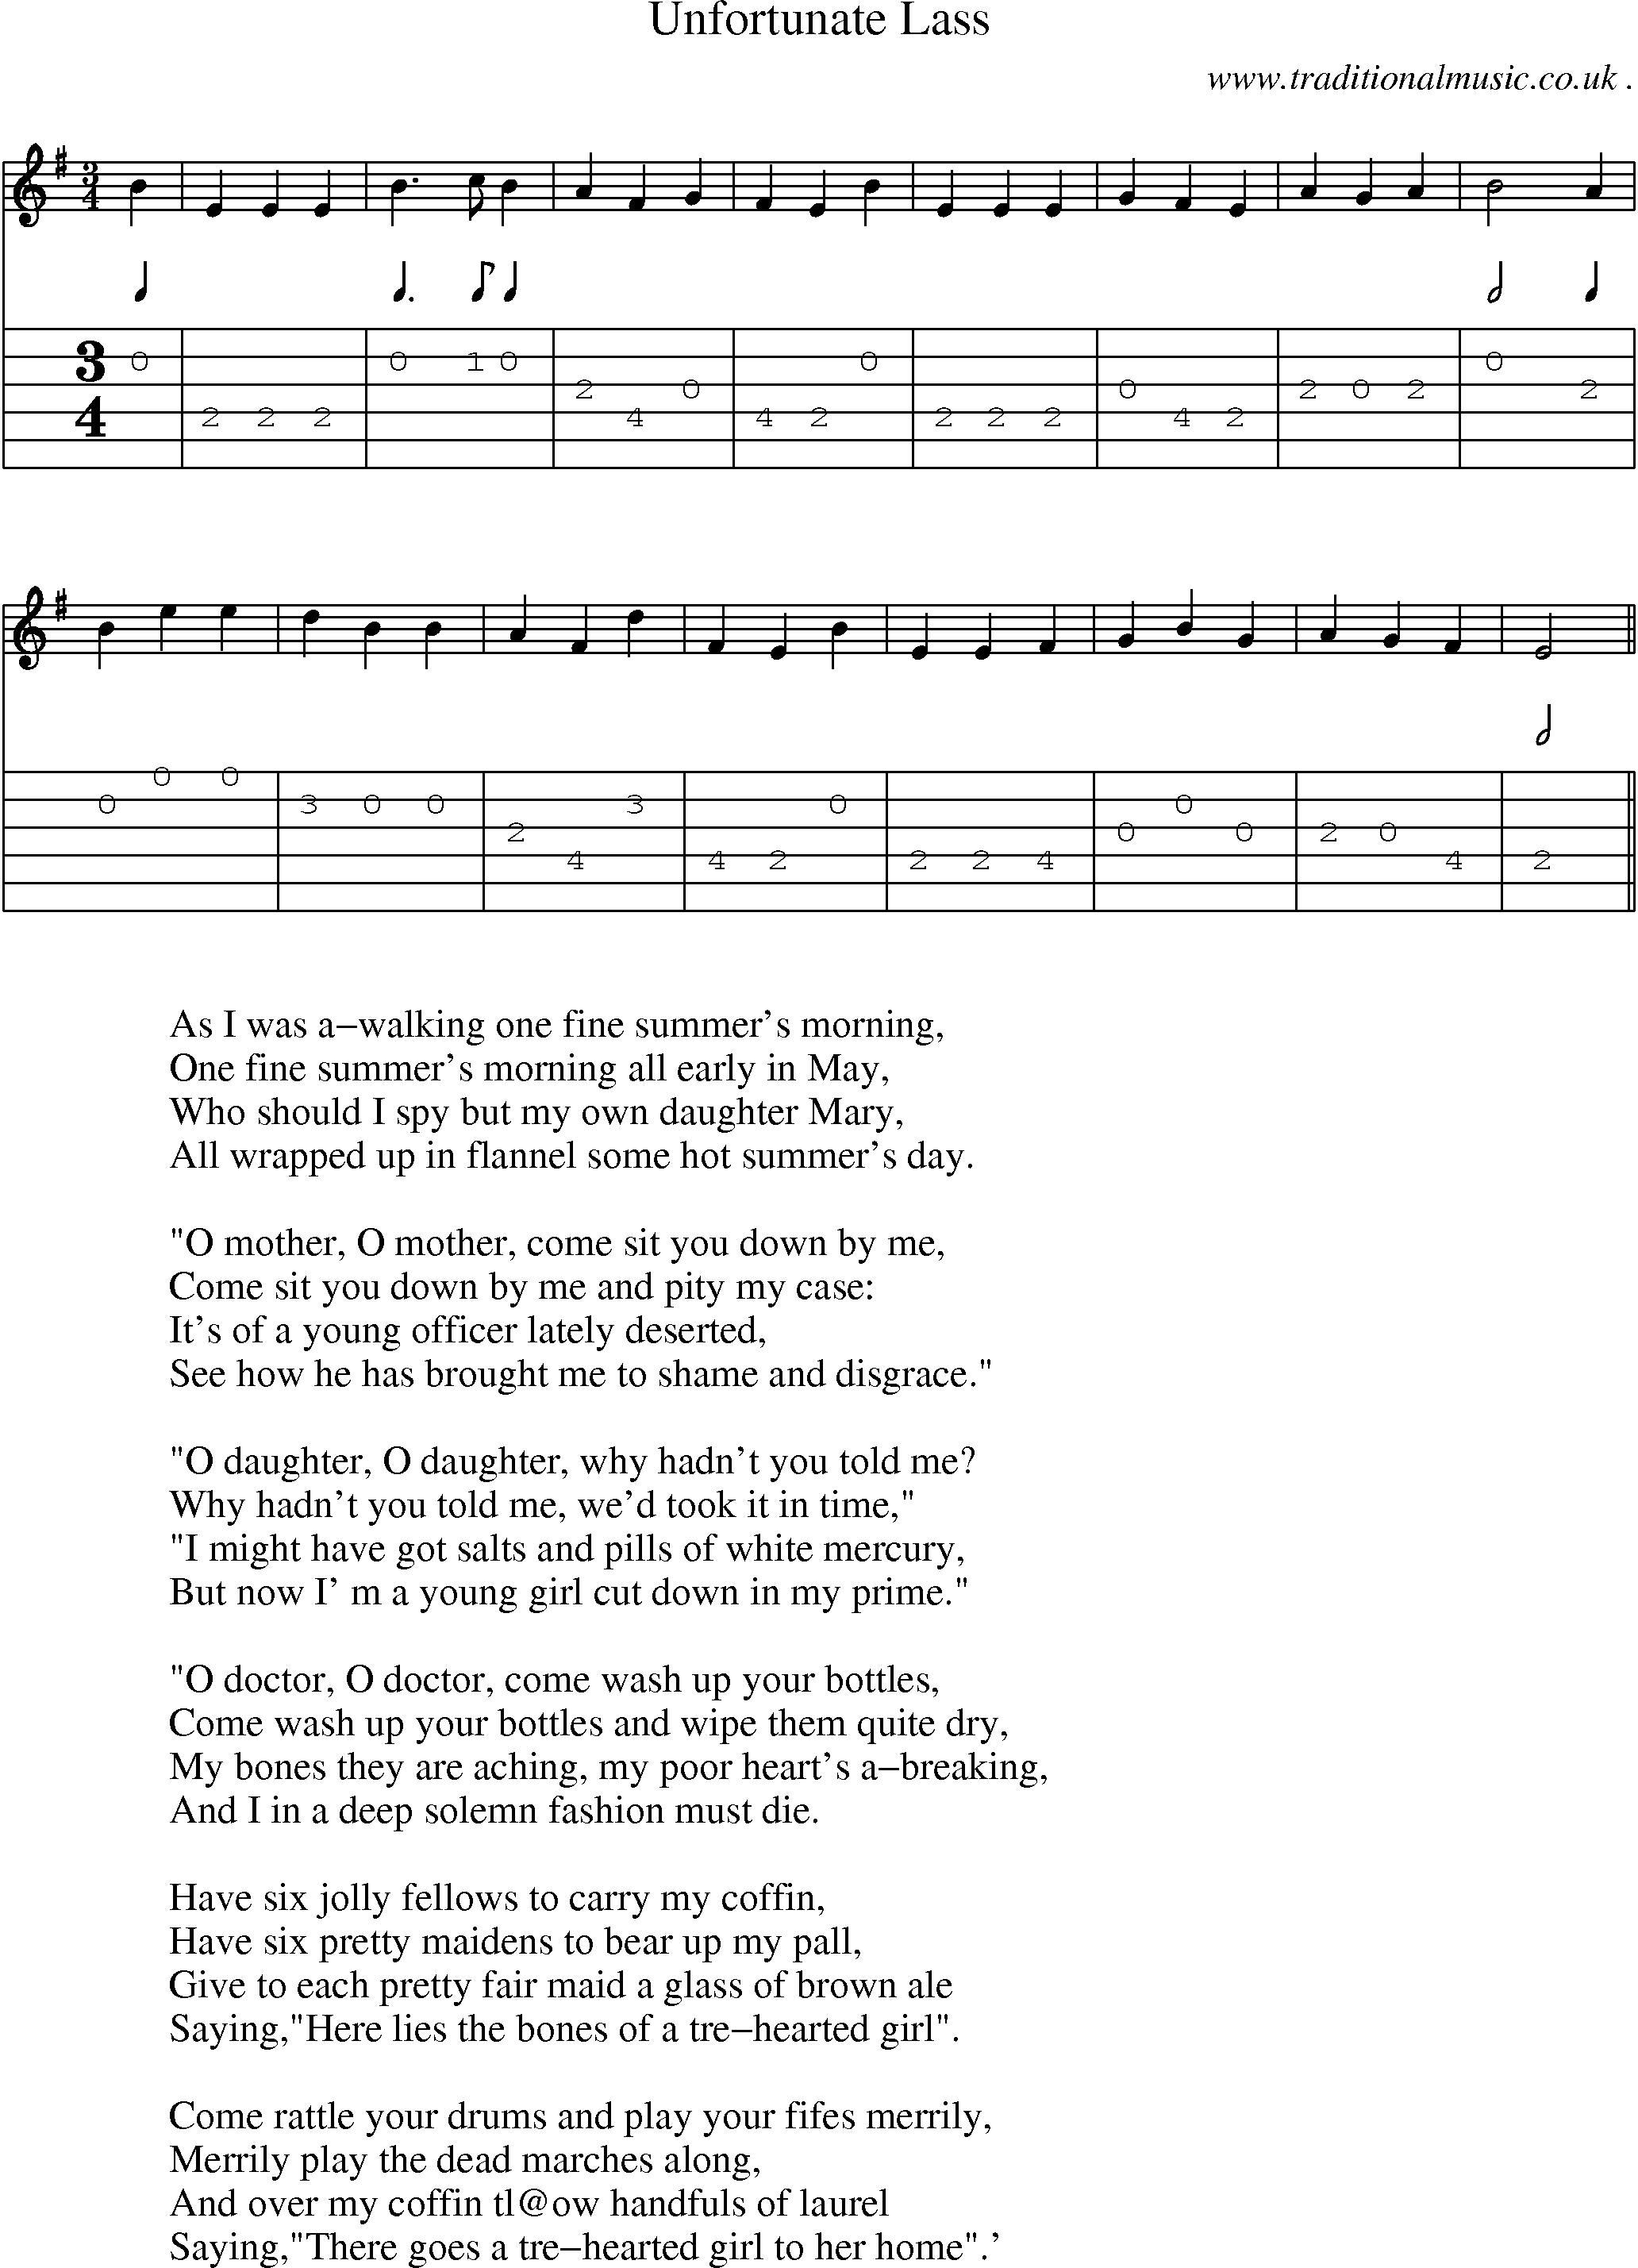 Sheet-Music and Guitar Tabs for Unfortunate Lass